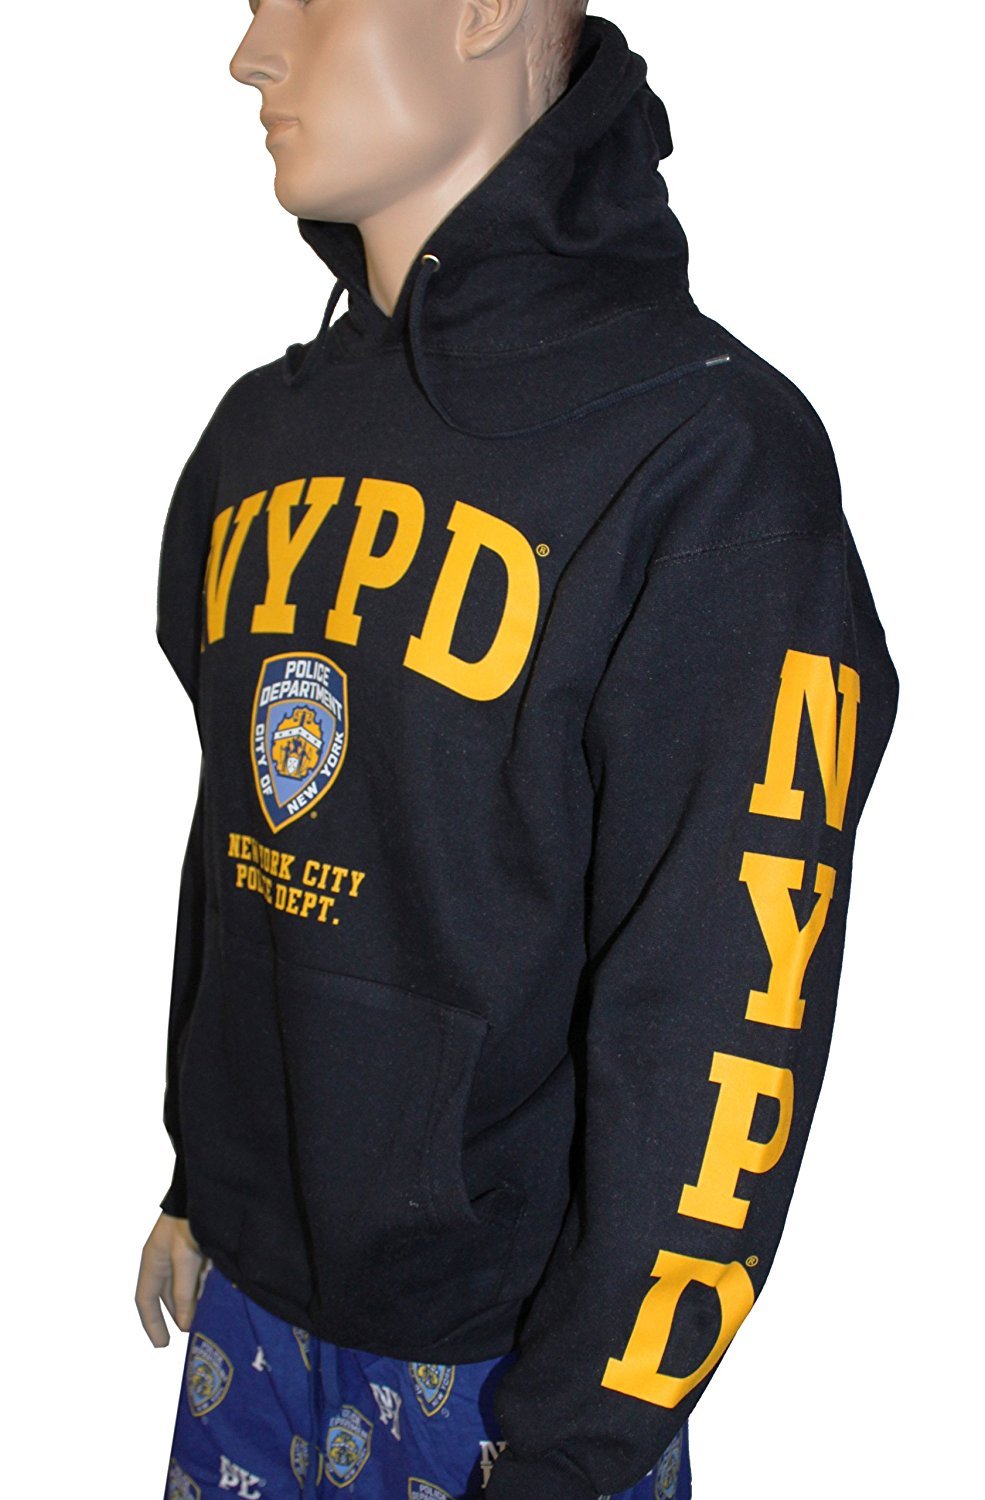 nypd pullover